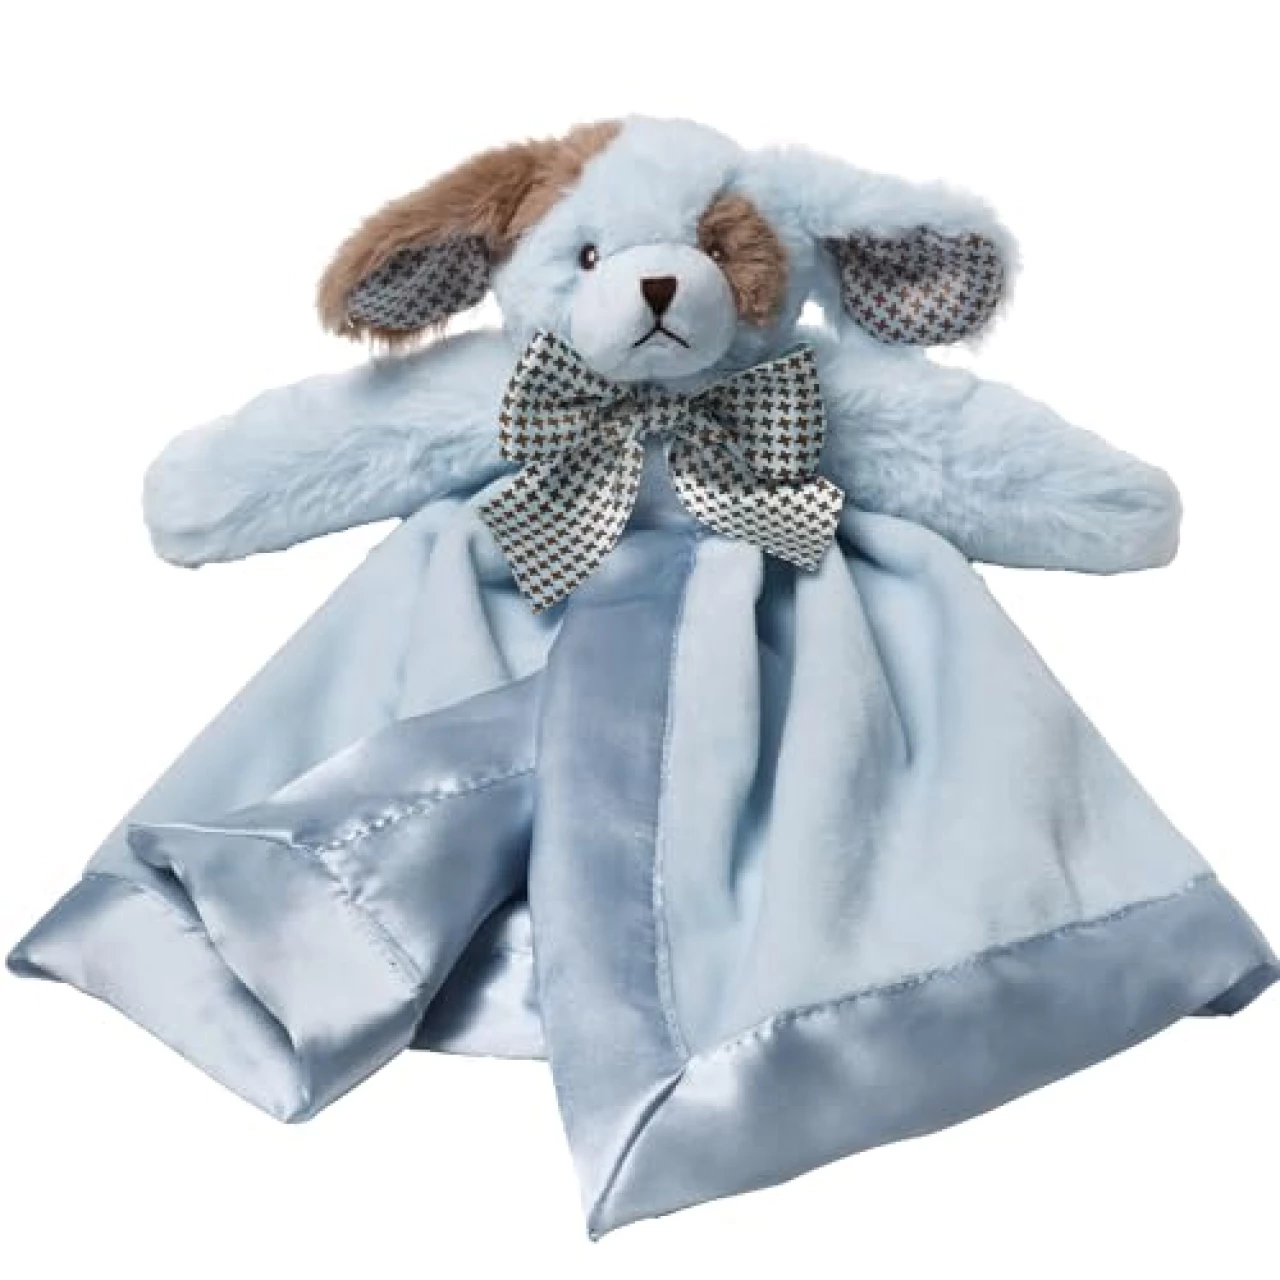 Bearington Baby Waggles Snuggler, 15 Inch Blue Puppy Dog Plush Stuffed Animal Security Blanket Lovey for Babies